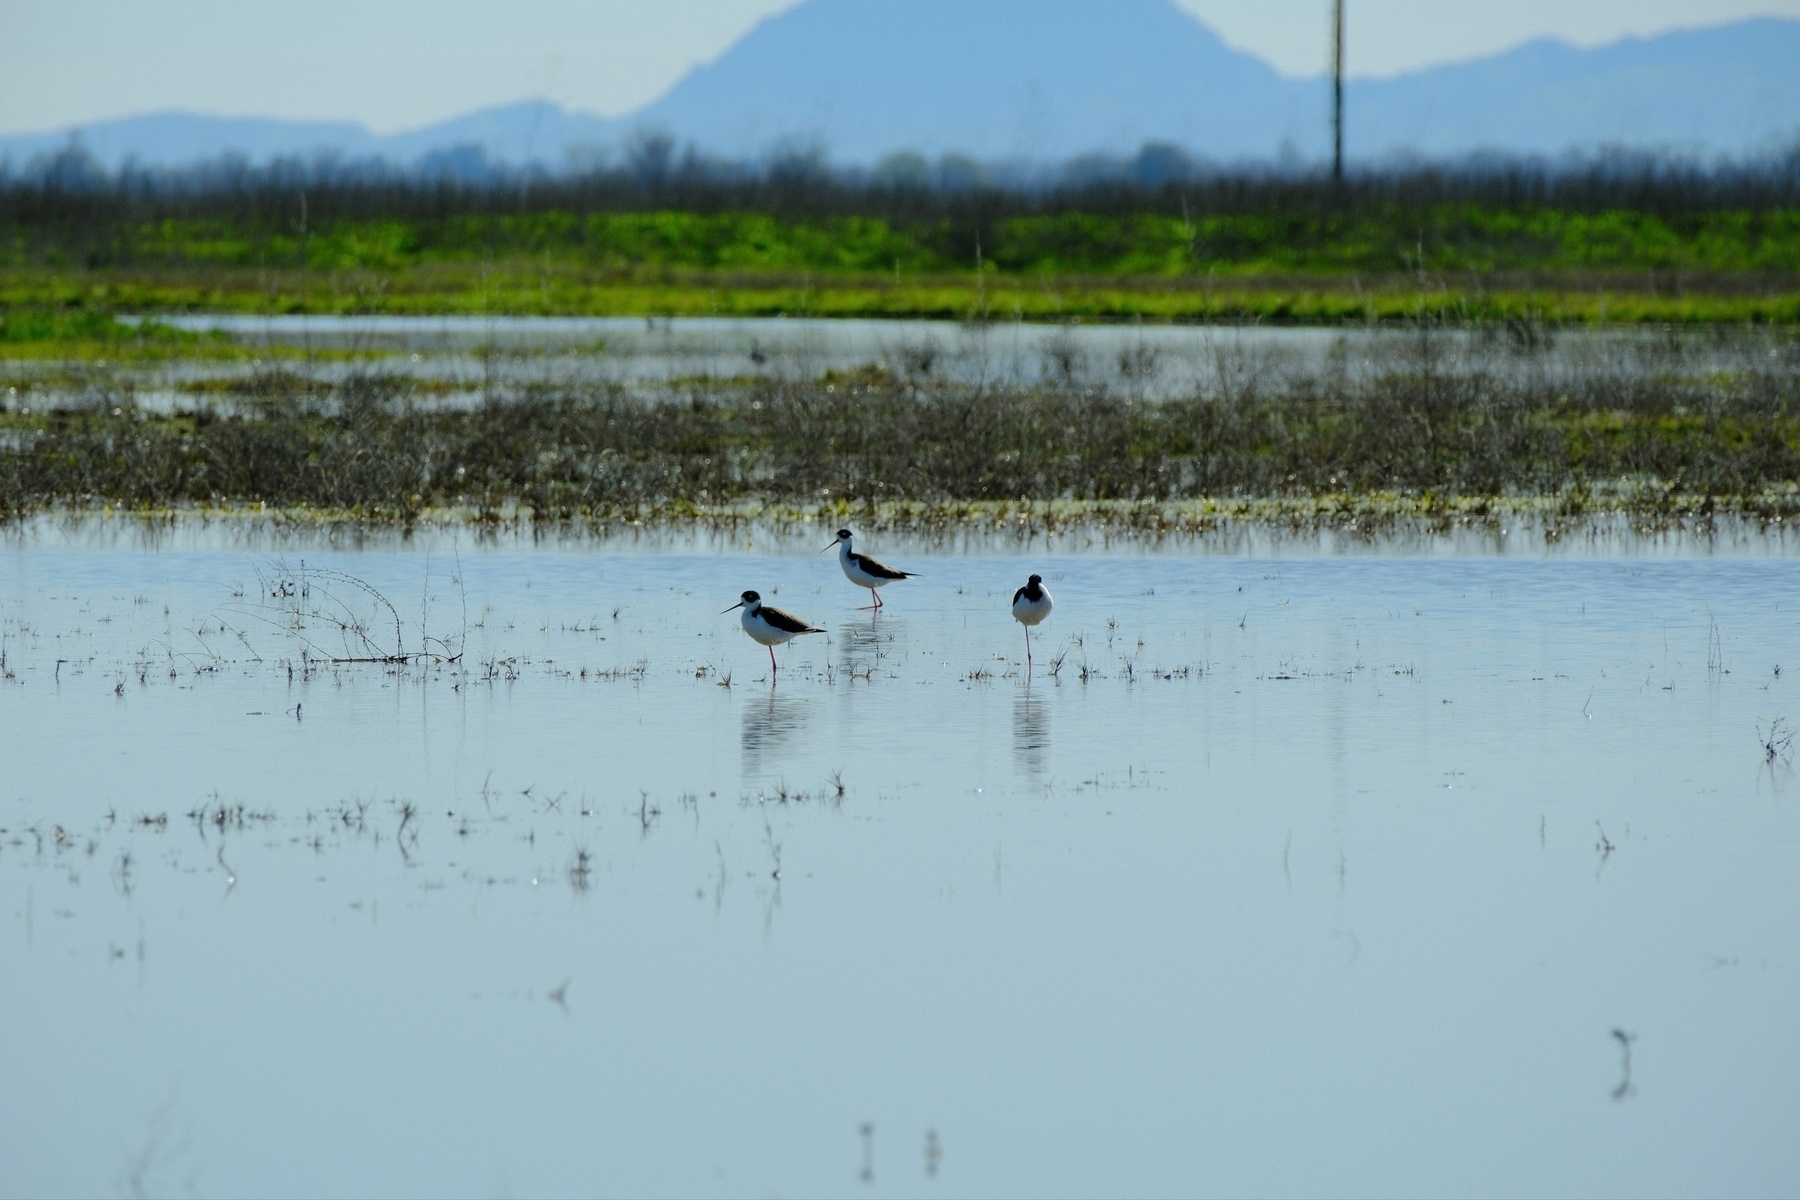 Three black-necked stilts standing in shallow water with a backdrop of distant mountains and greenery.